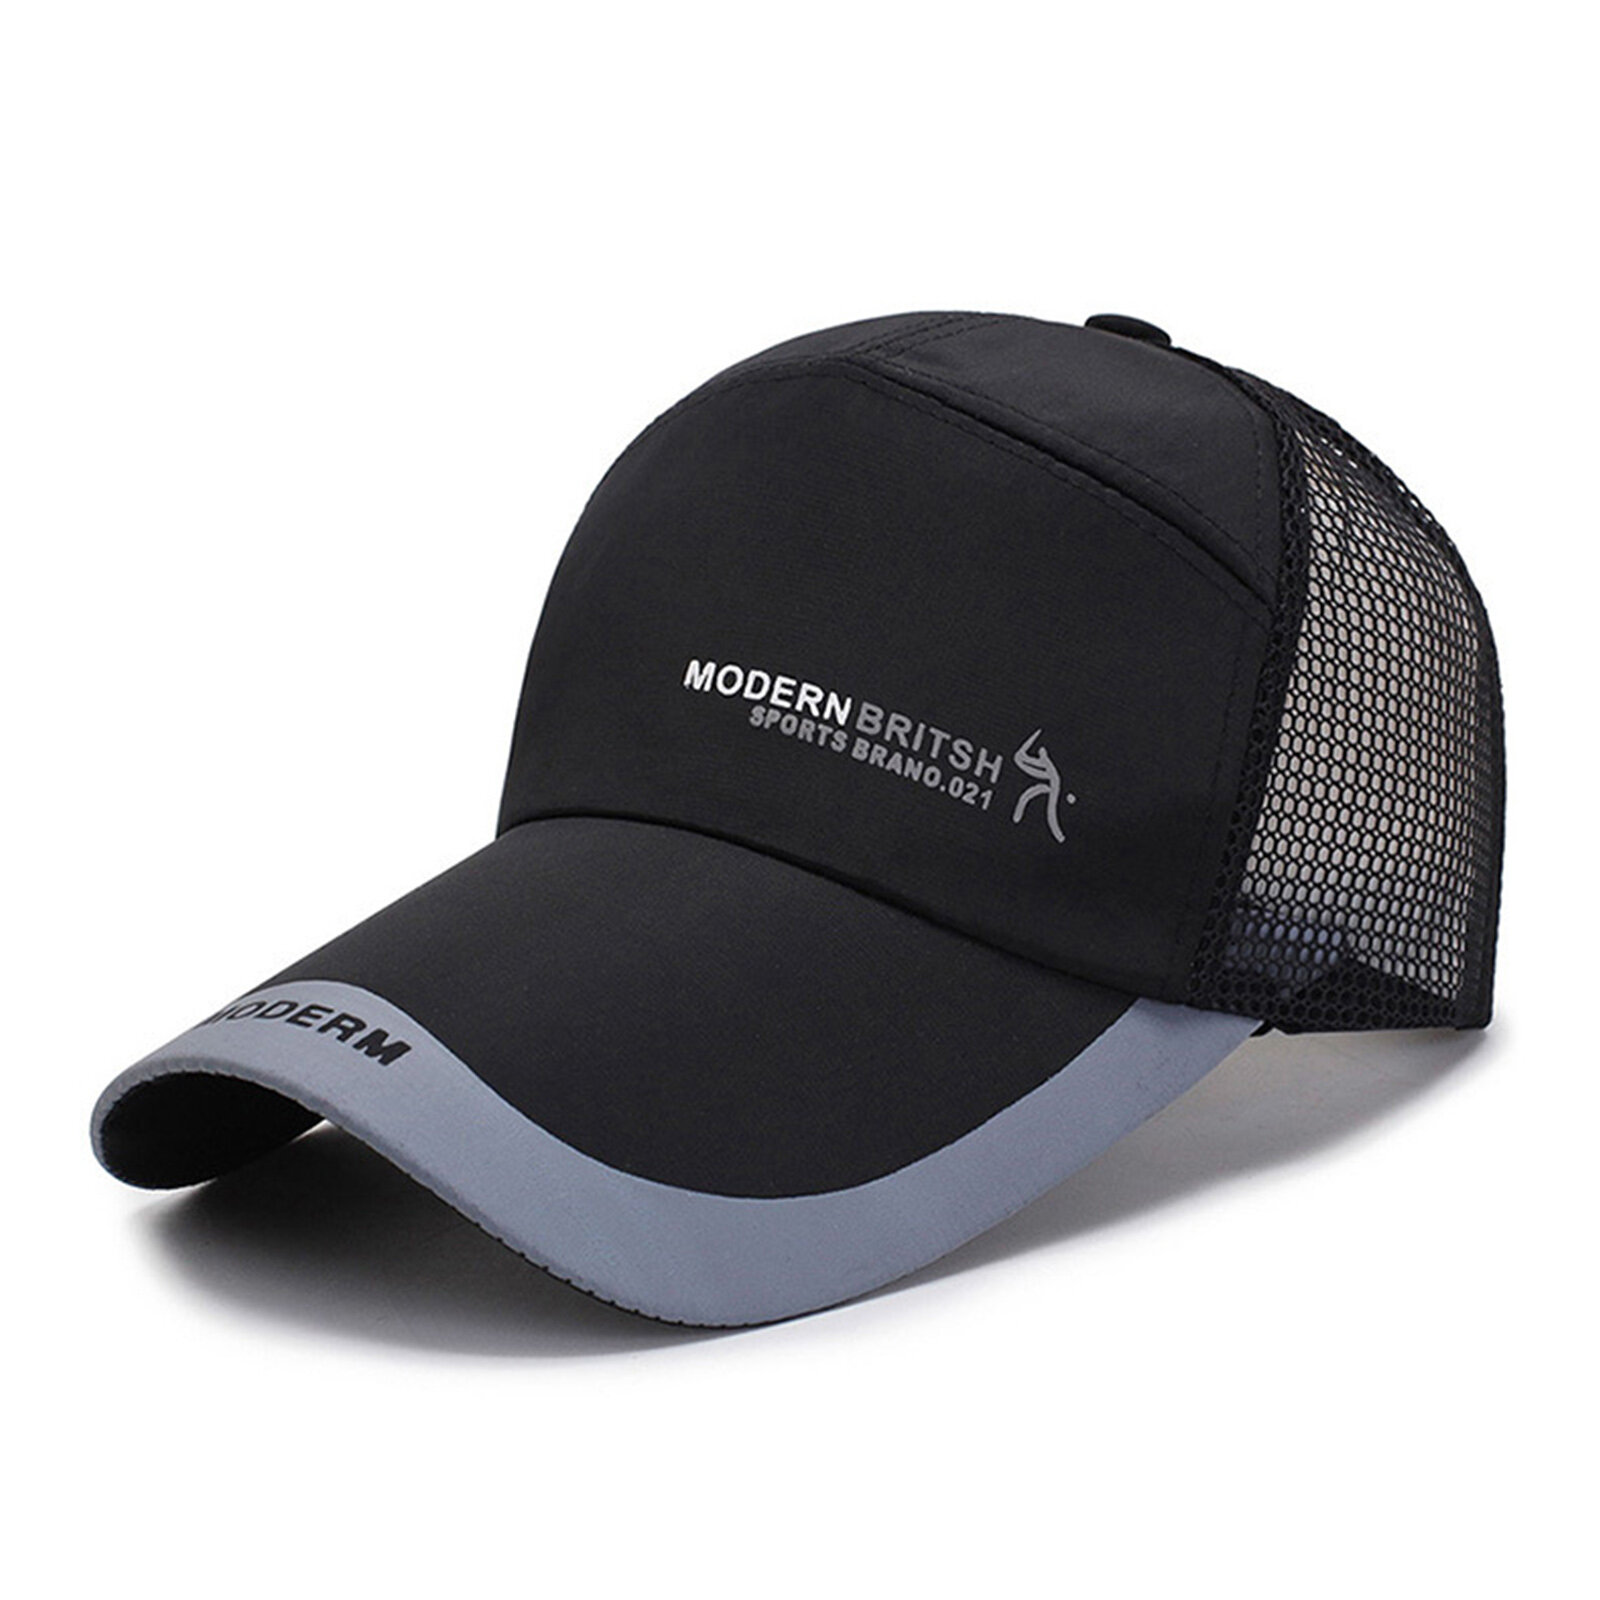 Unisex Polyester Casual Outdoor Breathable Adjustable Quick Dry Sunshade Peaked Caps Baseball Hats